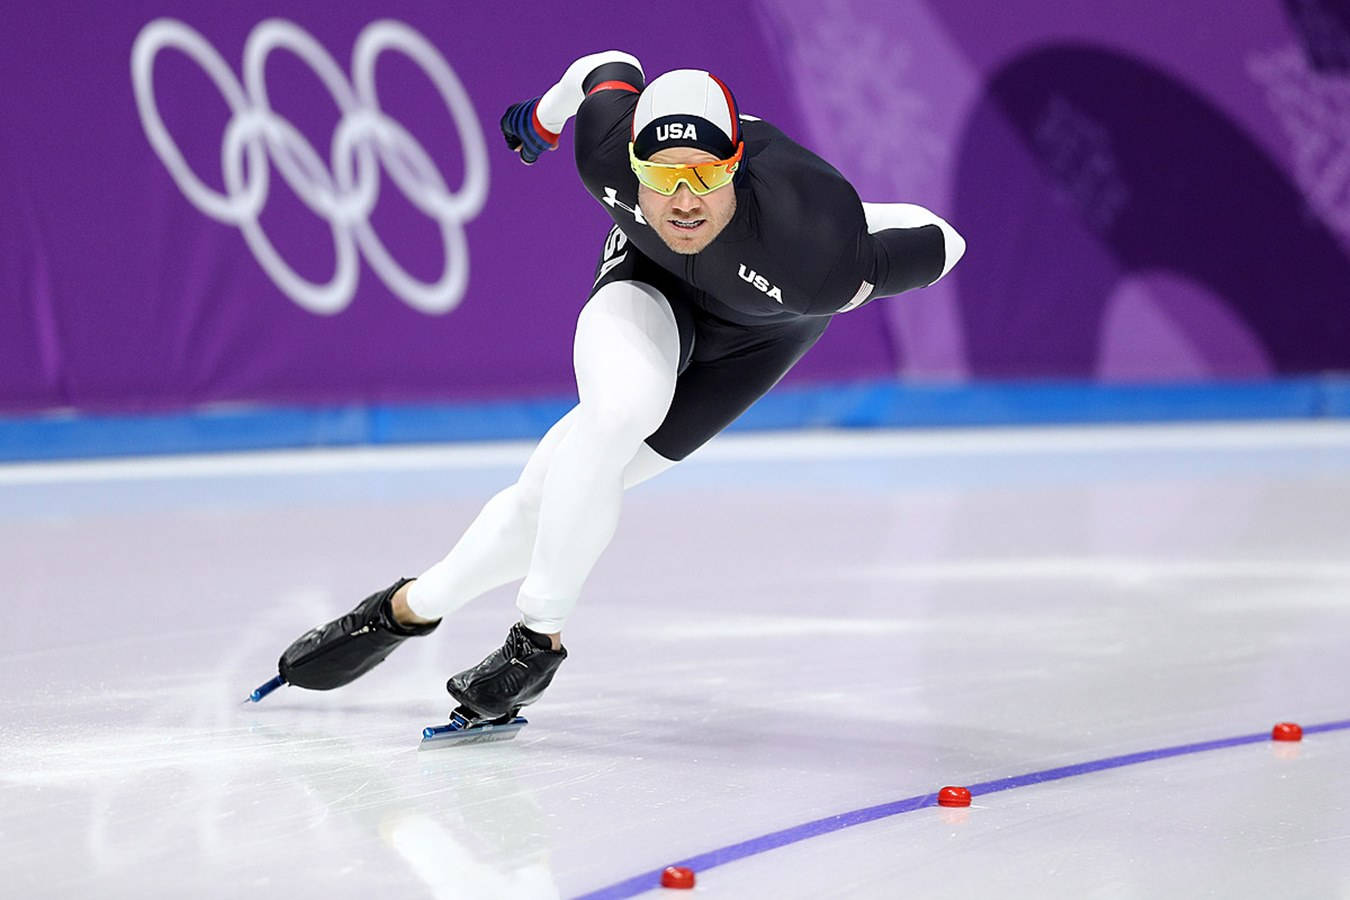 "Olympic Speed Skater Joey Mantia in Action" Wallpaper